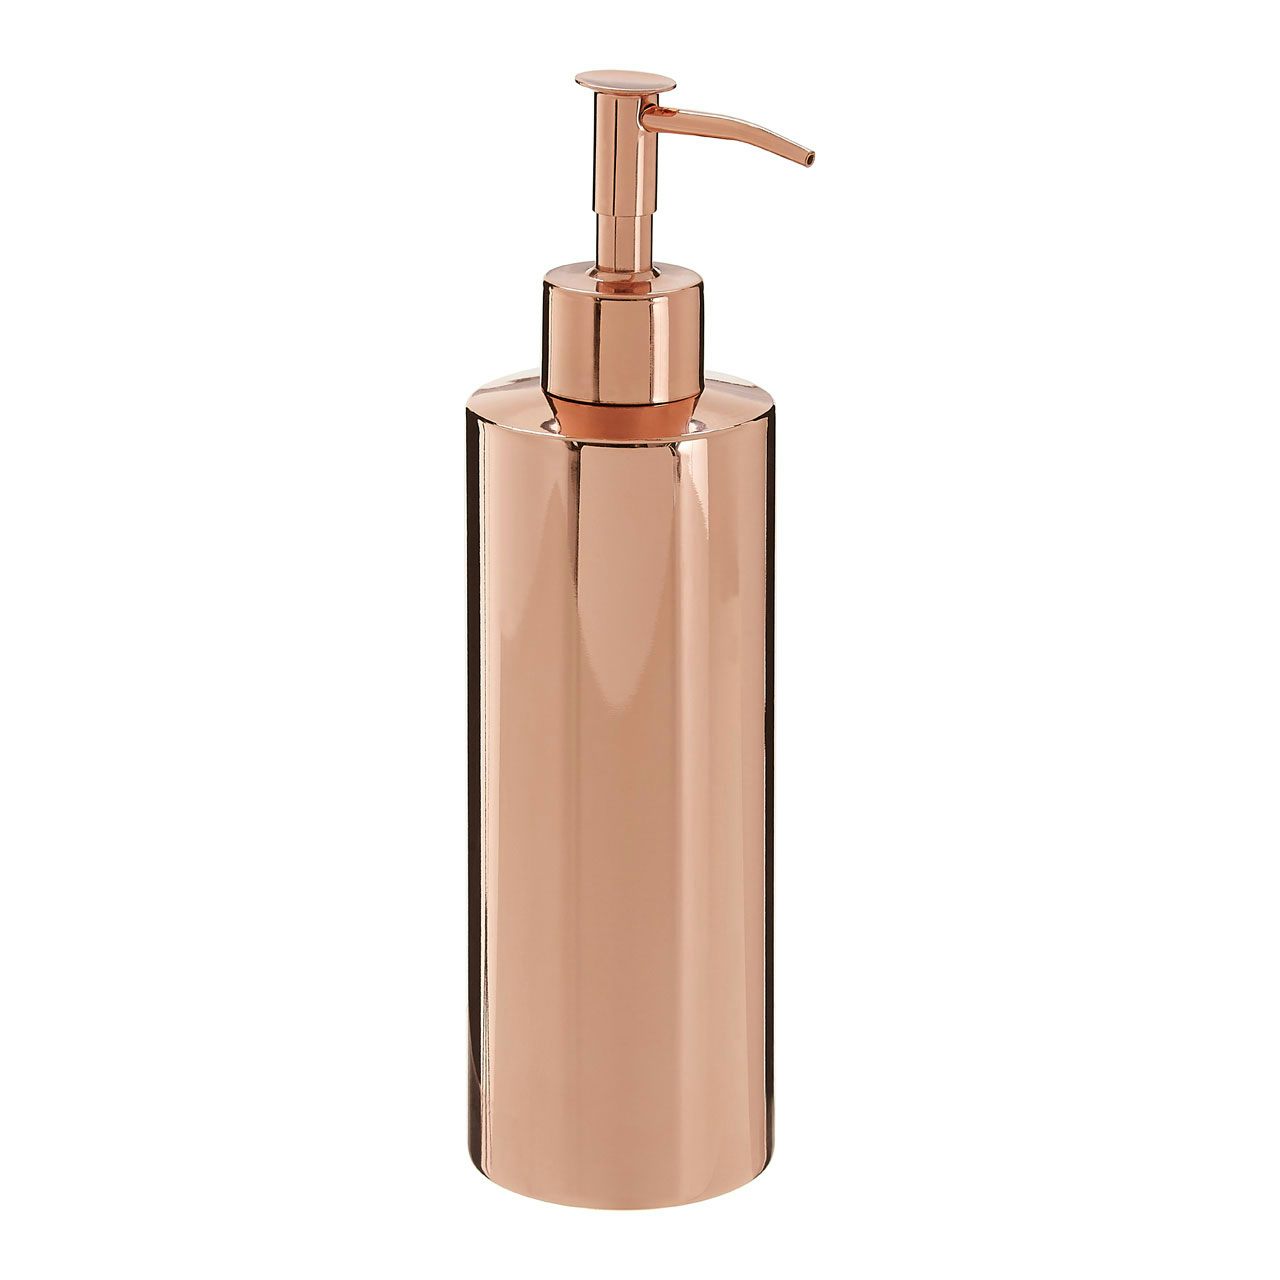 Accents Clara stainless steel rose gold soap dispenser